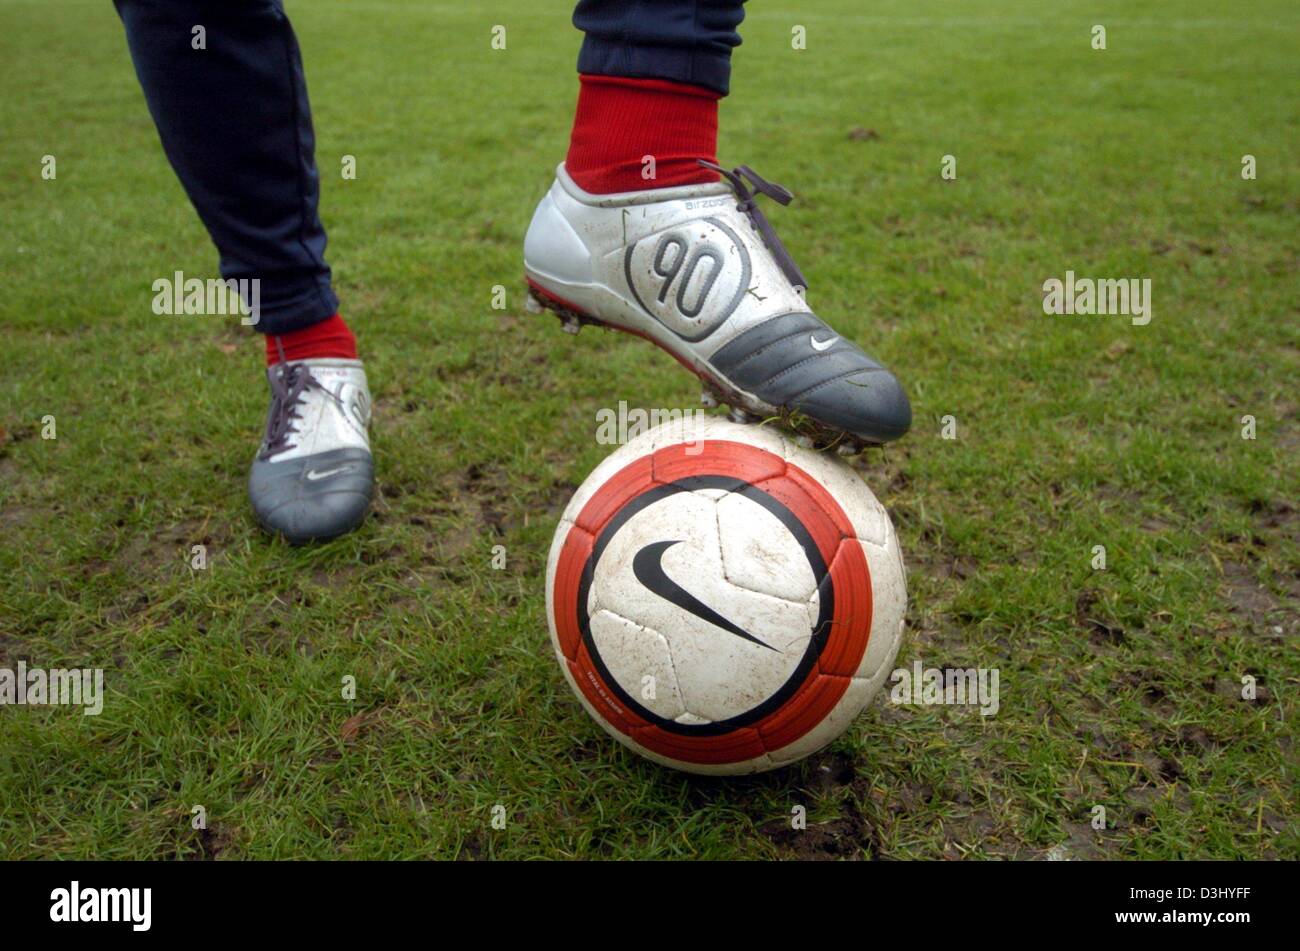 dpa) A Hamburg soccer player poses with the new "Nike" shoe model "Air Zoom Total  90 III" on the HSV Hamburg training grounds in Hamburg on Wednesday, 25  February, 2004. On 6